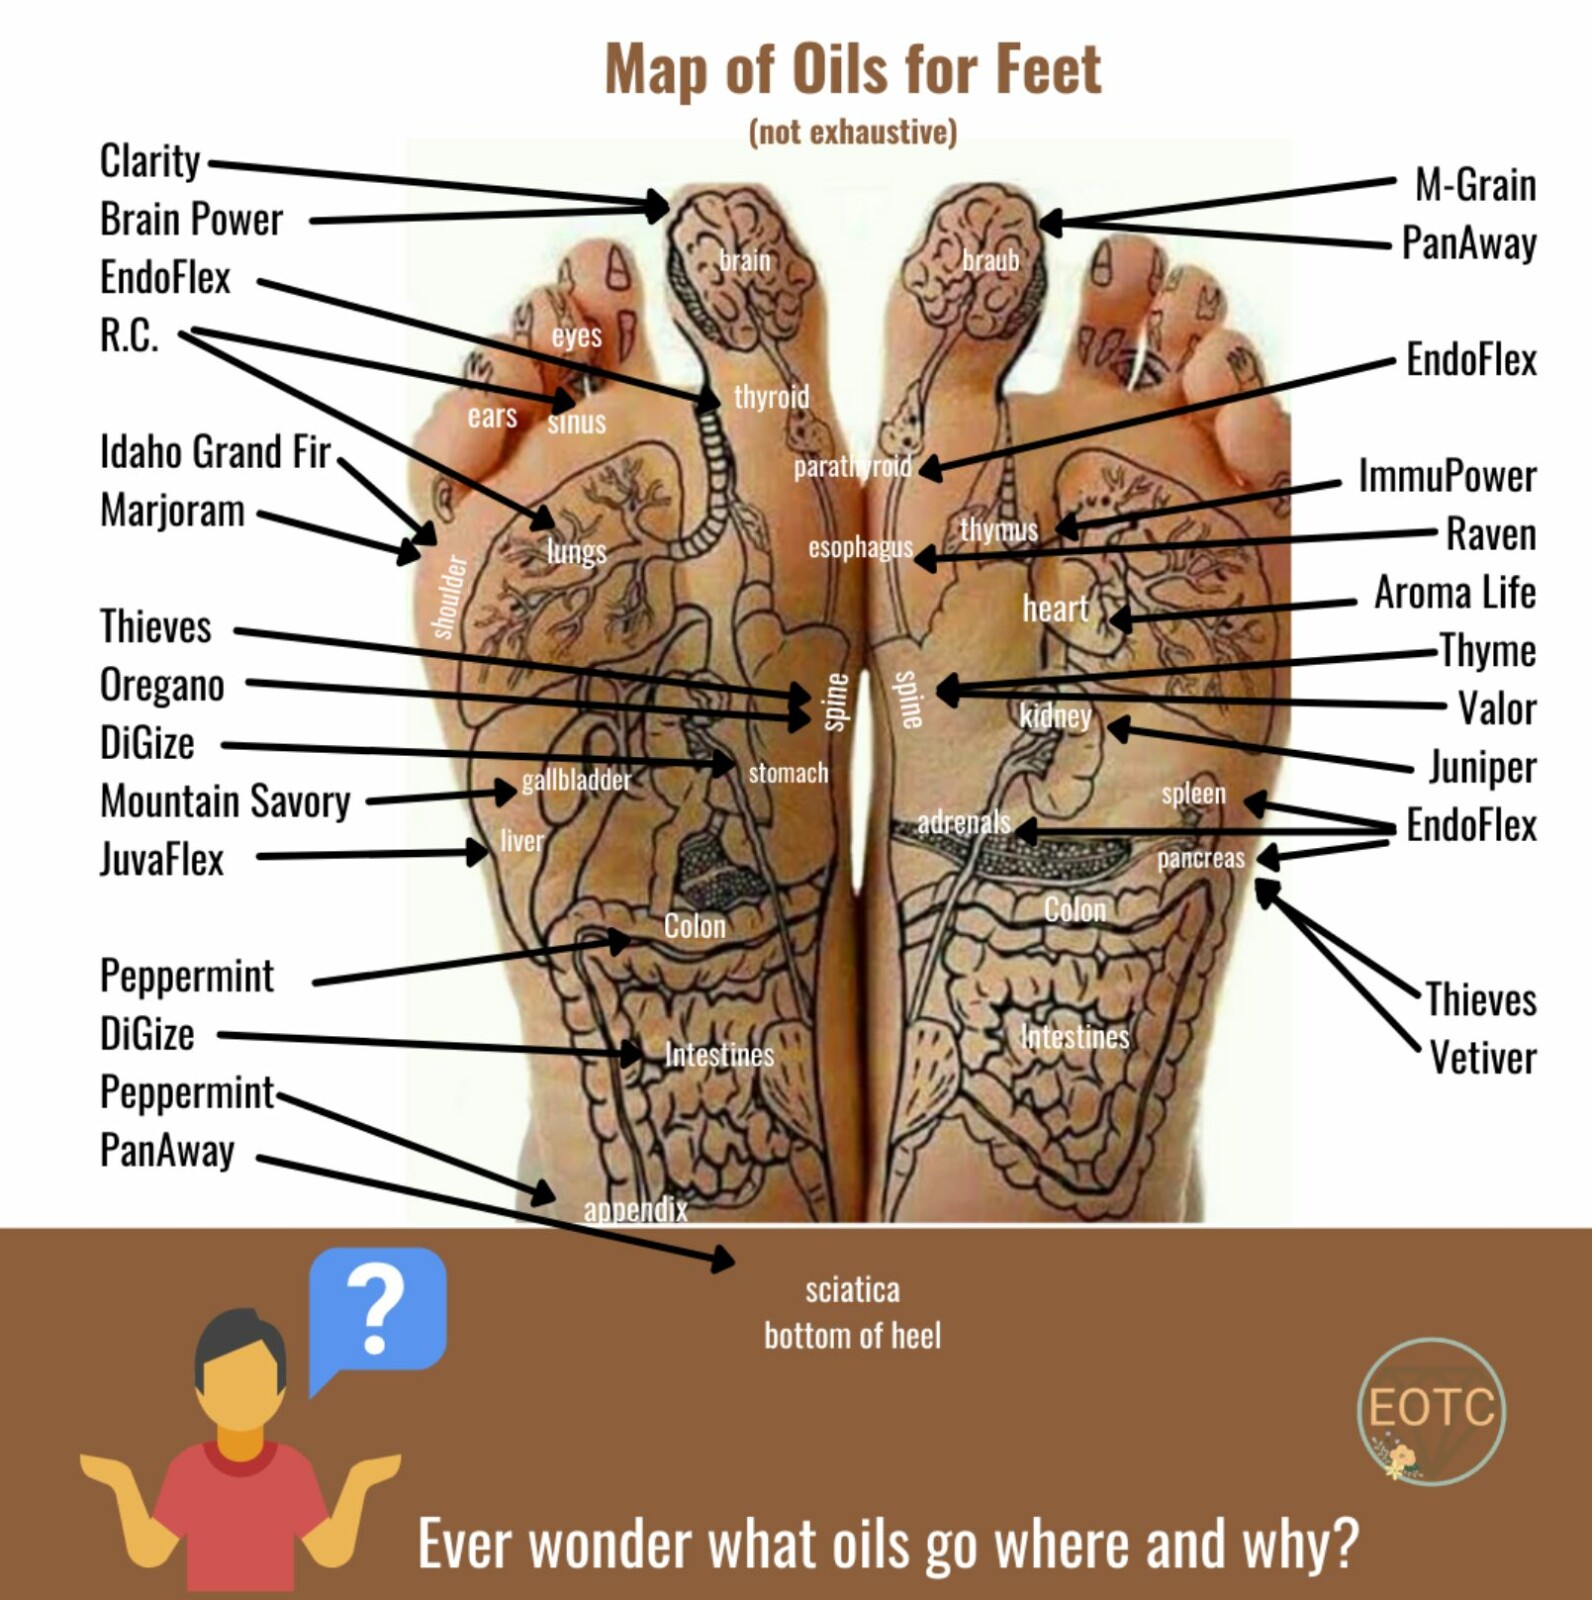 Ever wonder why and where we put oils on the feet?